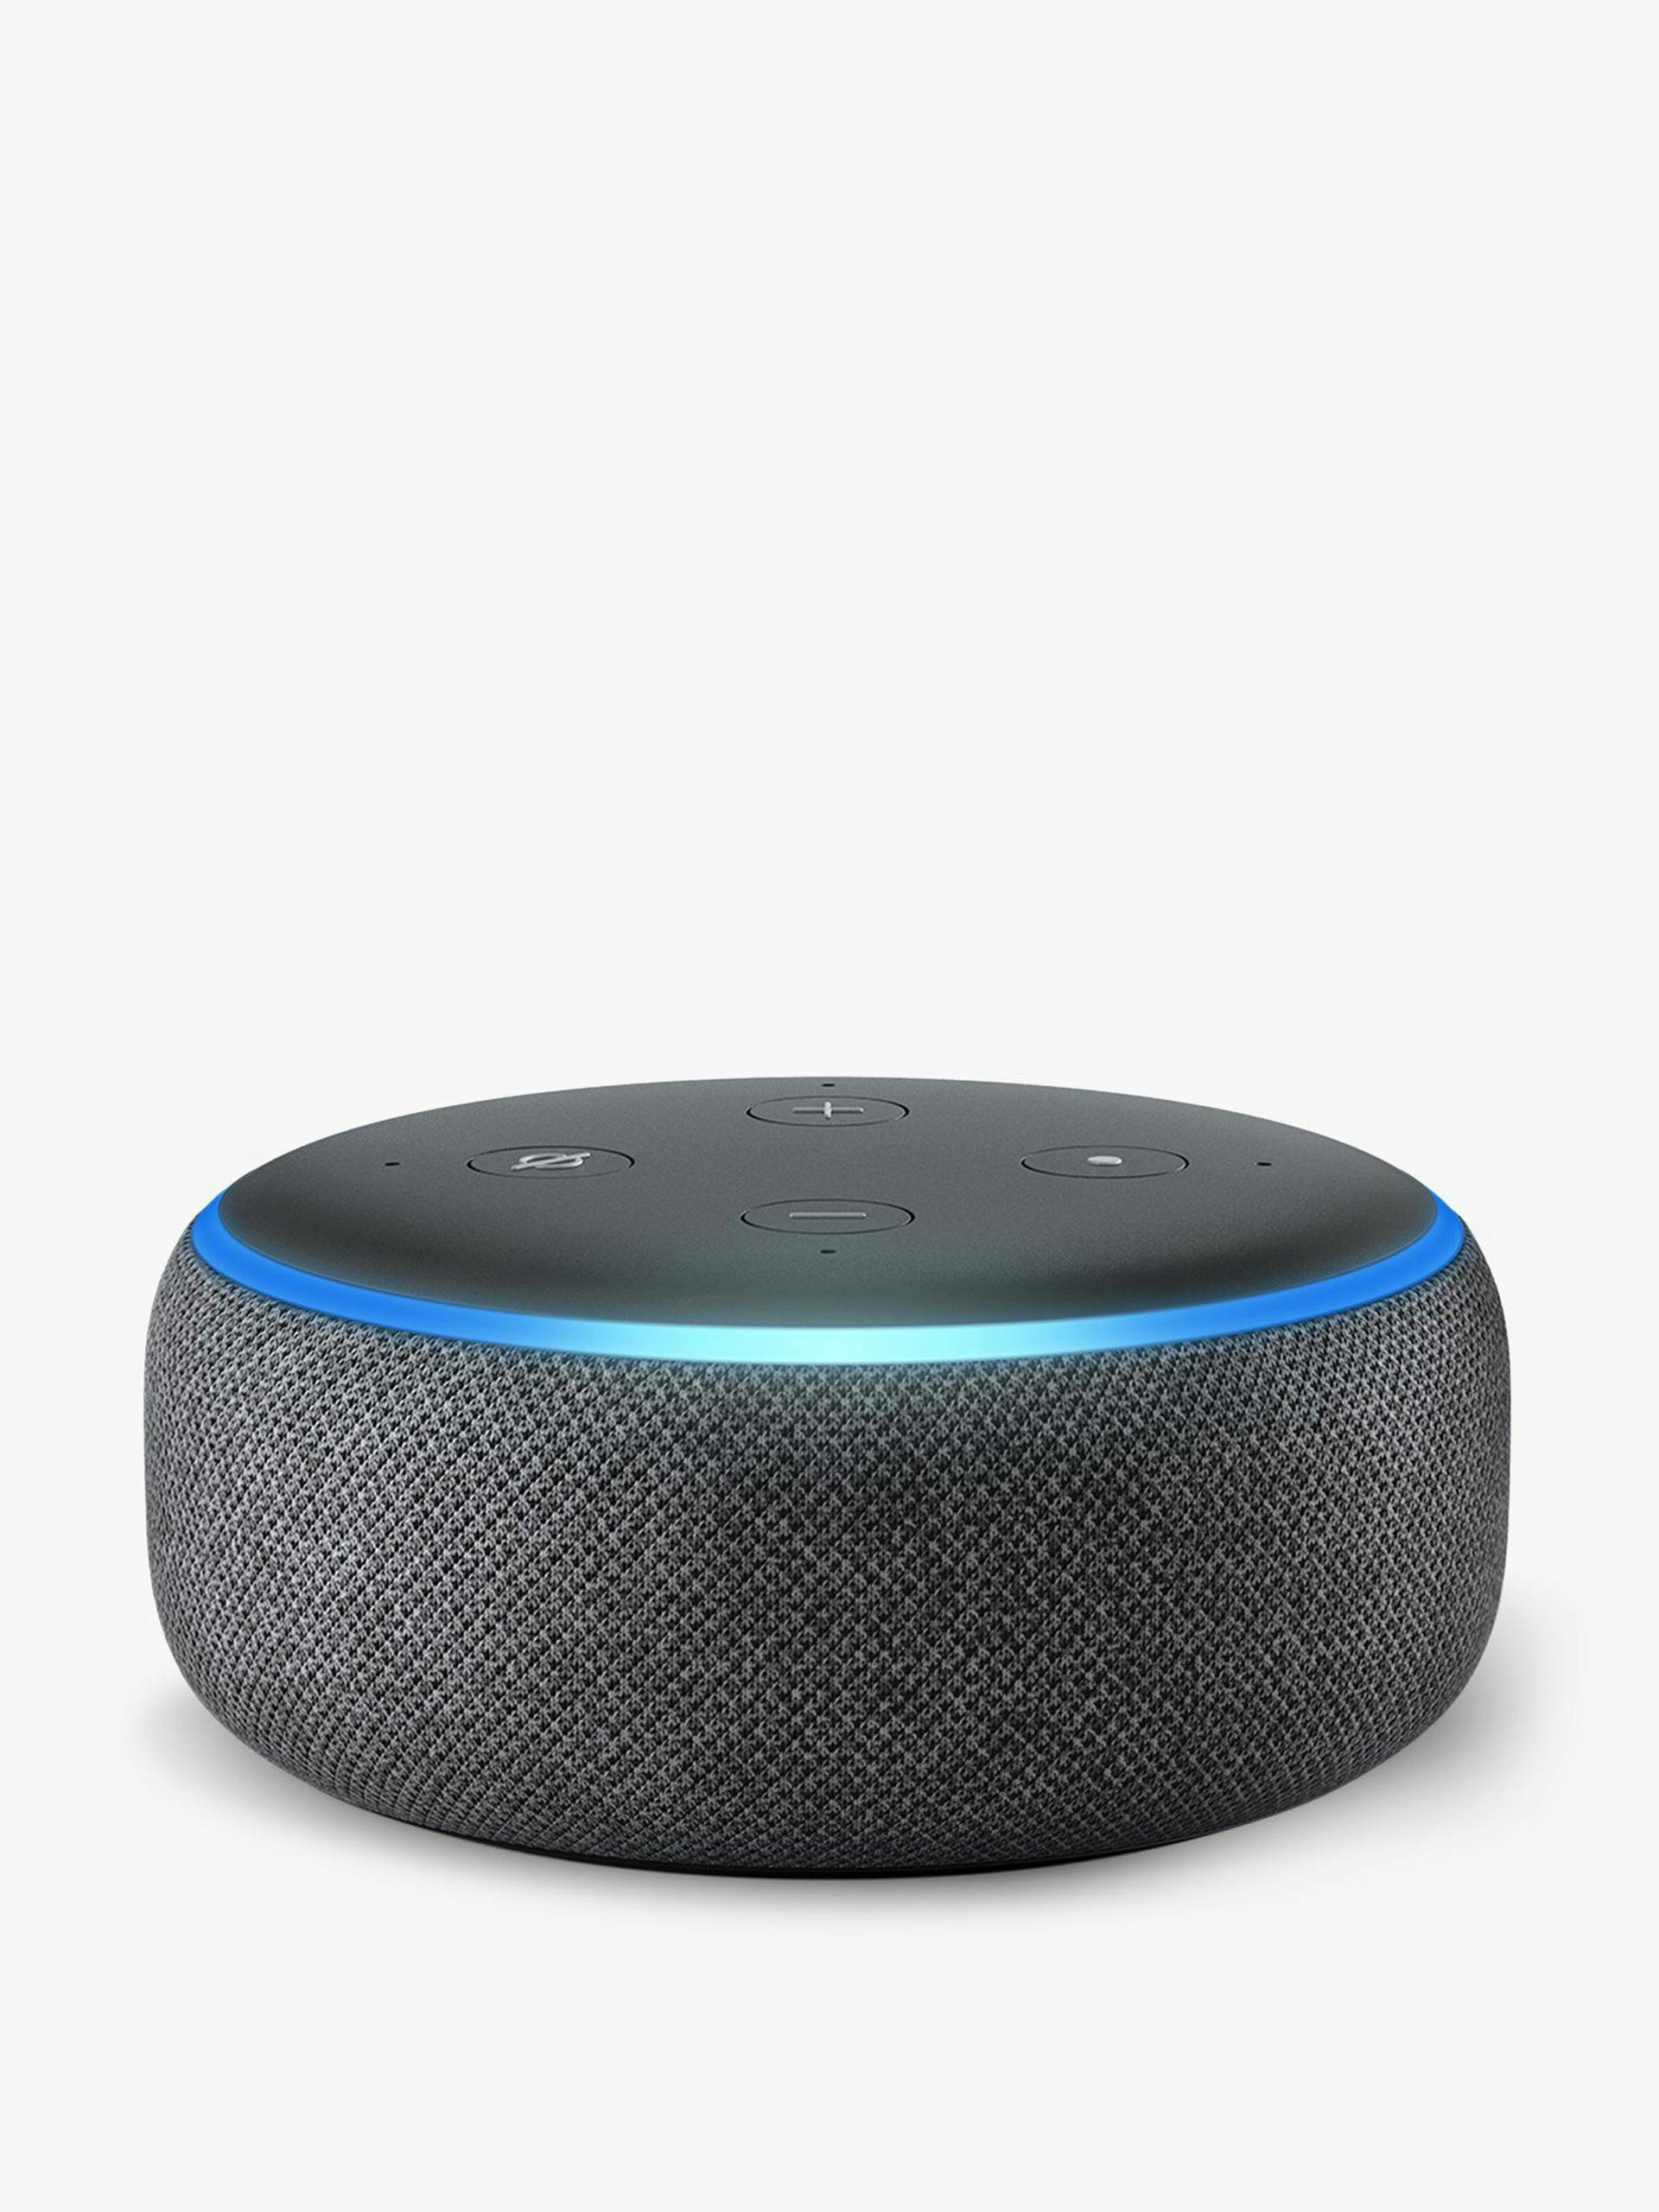 Echo dot smart device with Alexa voice recognition and control, 3rd generation